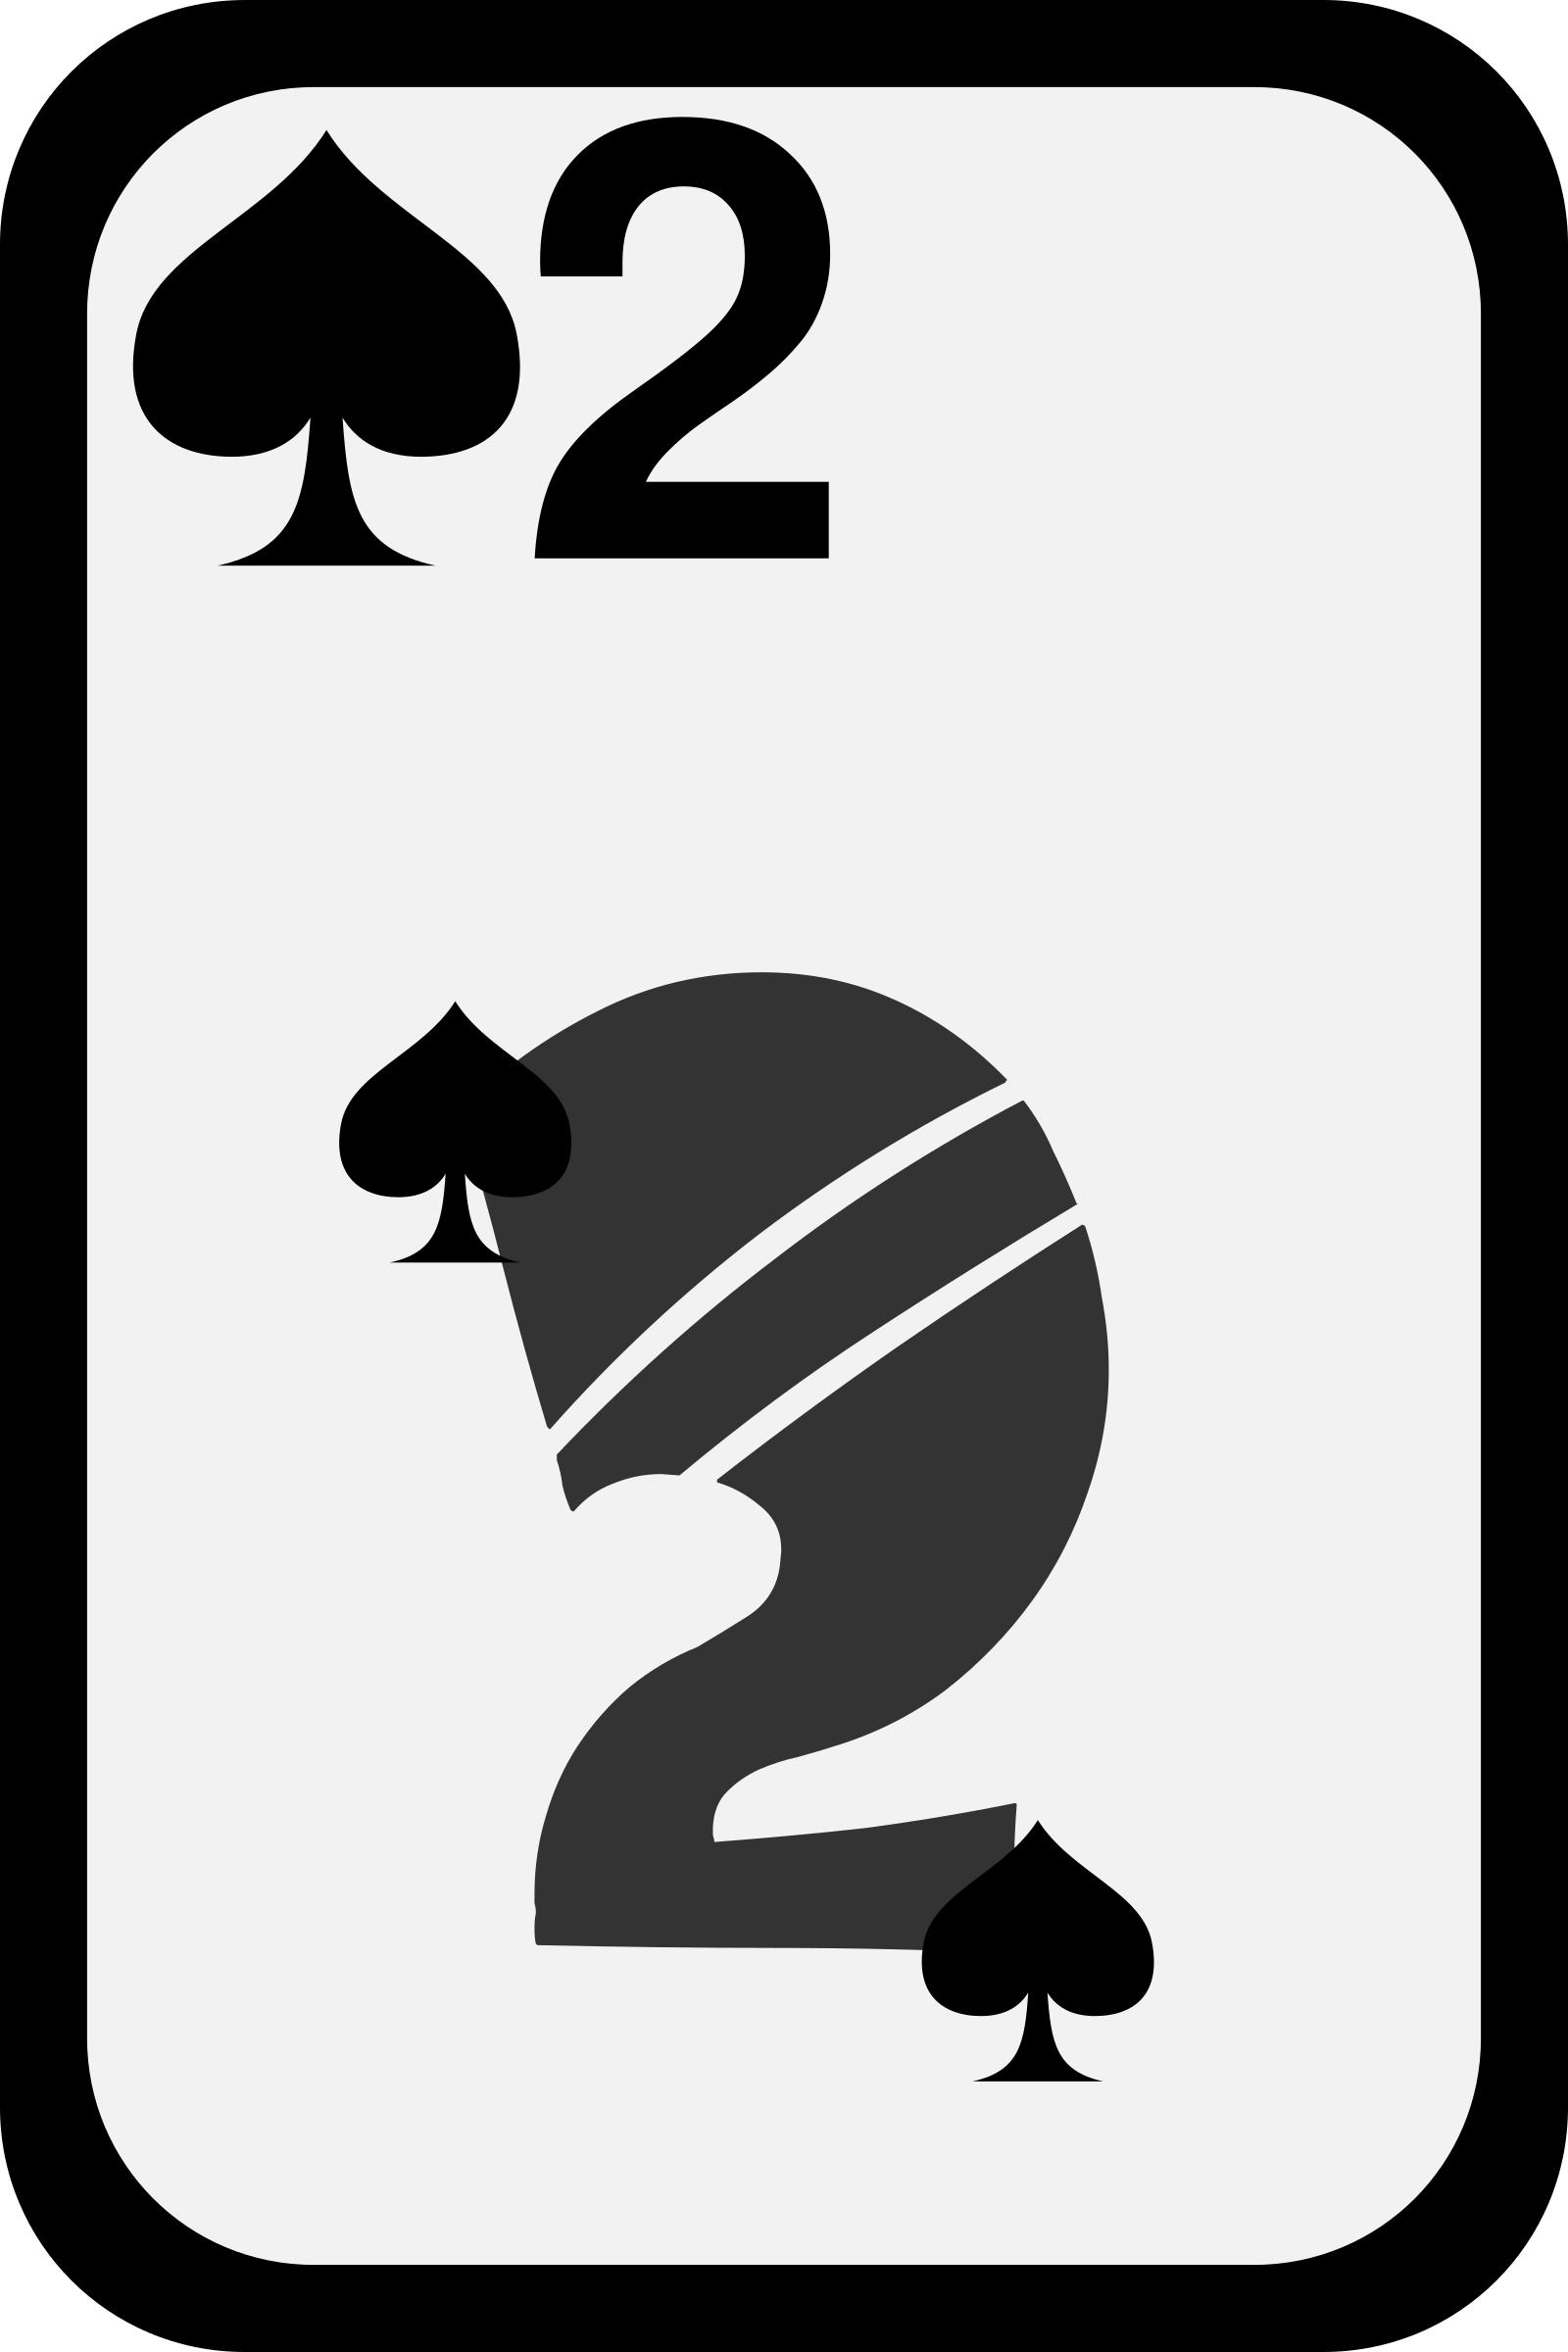 Two of Spades icons